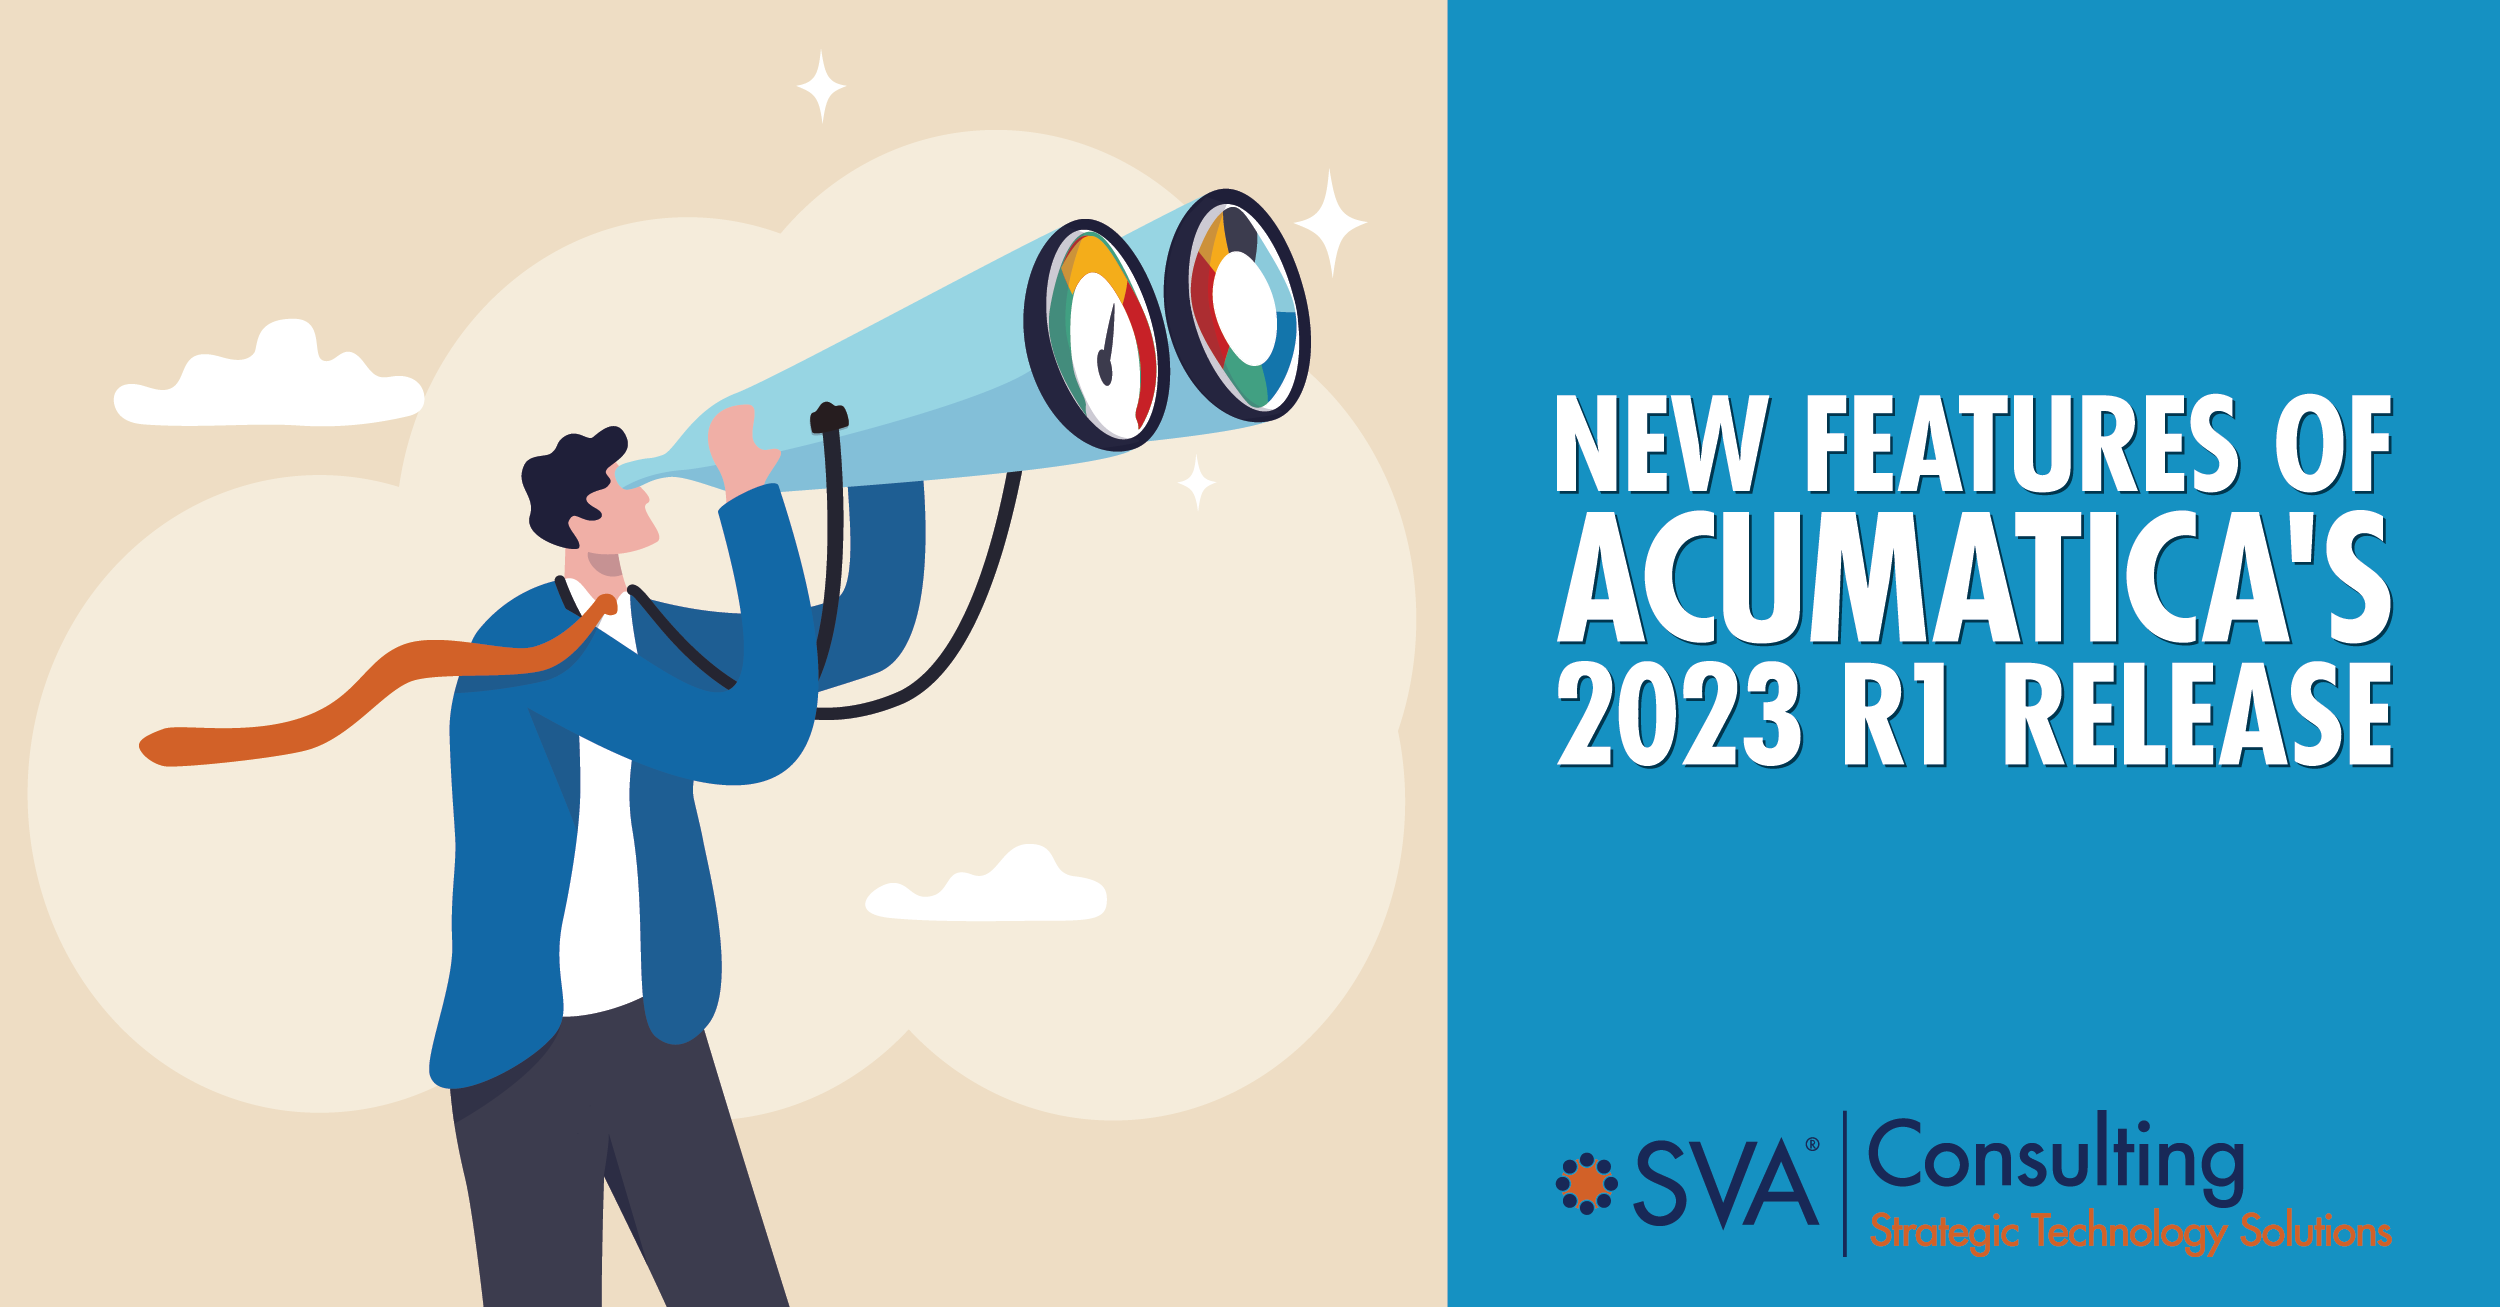 New Features of Acumatica's 2023 R1 Release | SVA Consulting